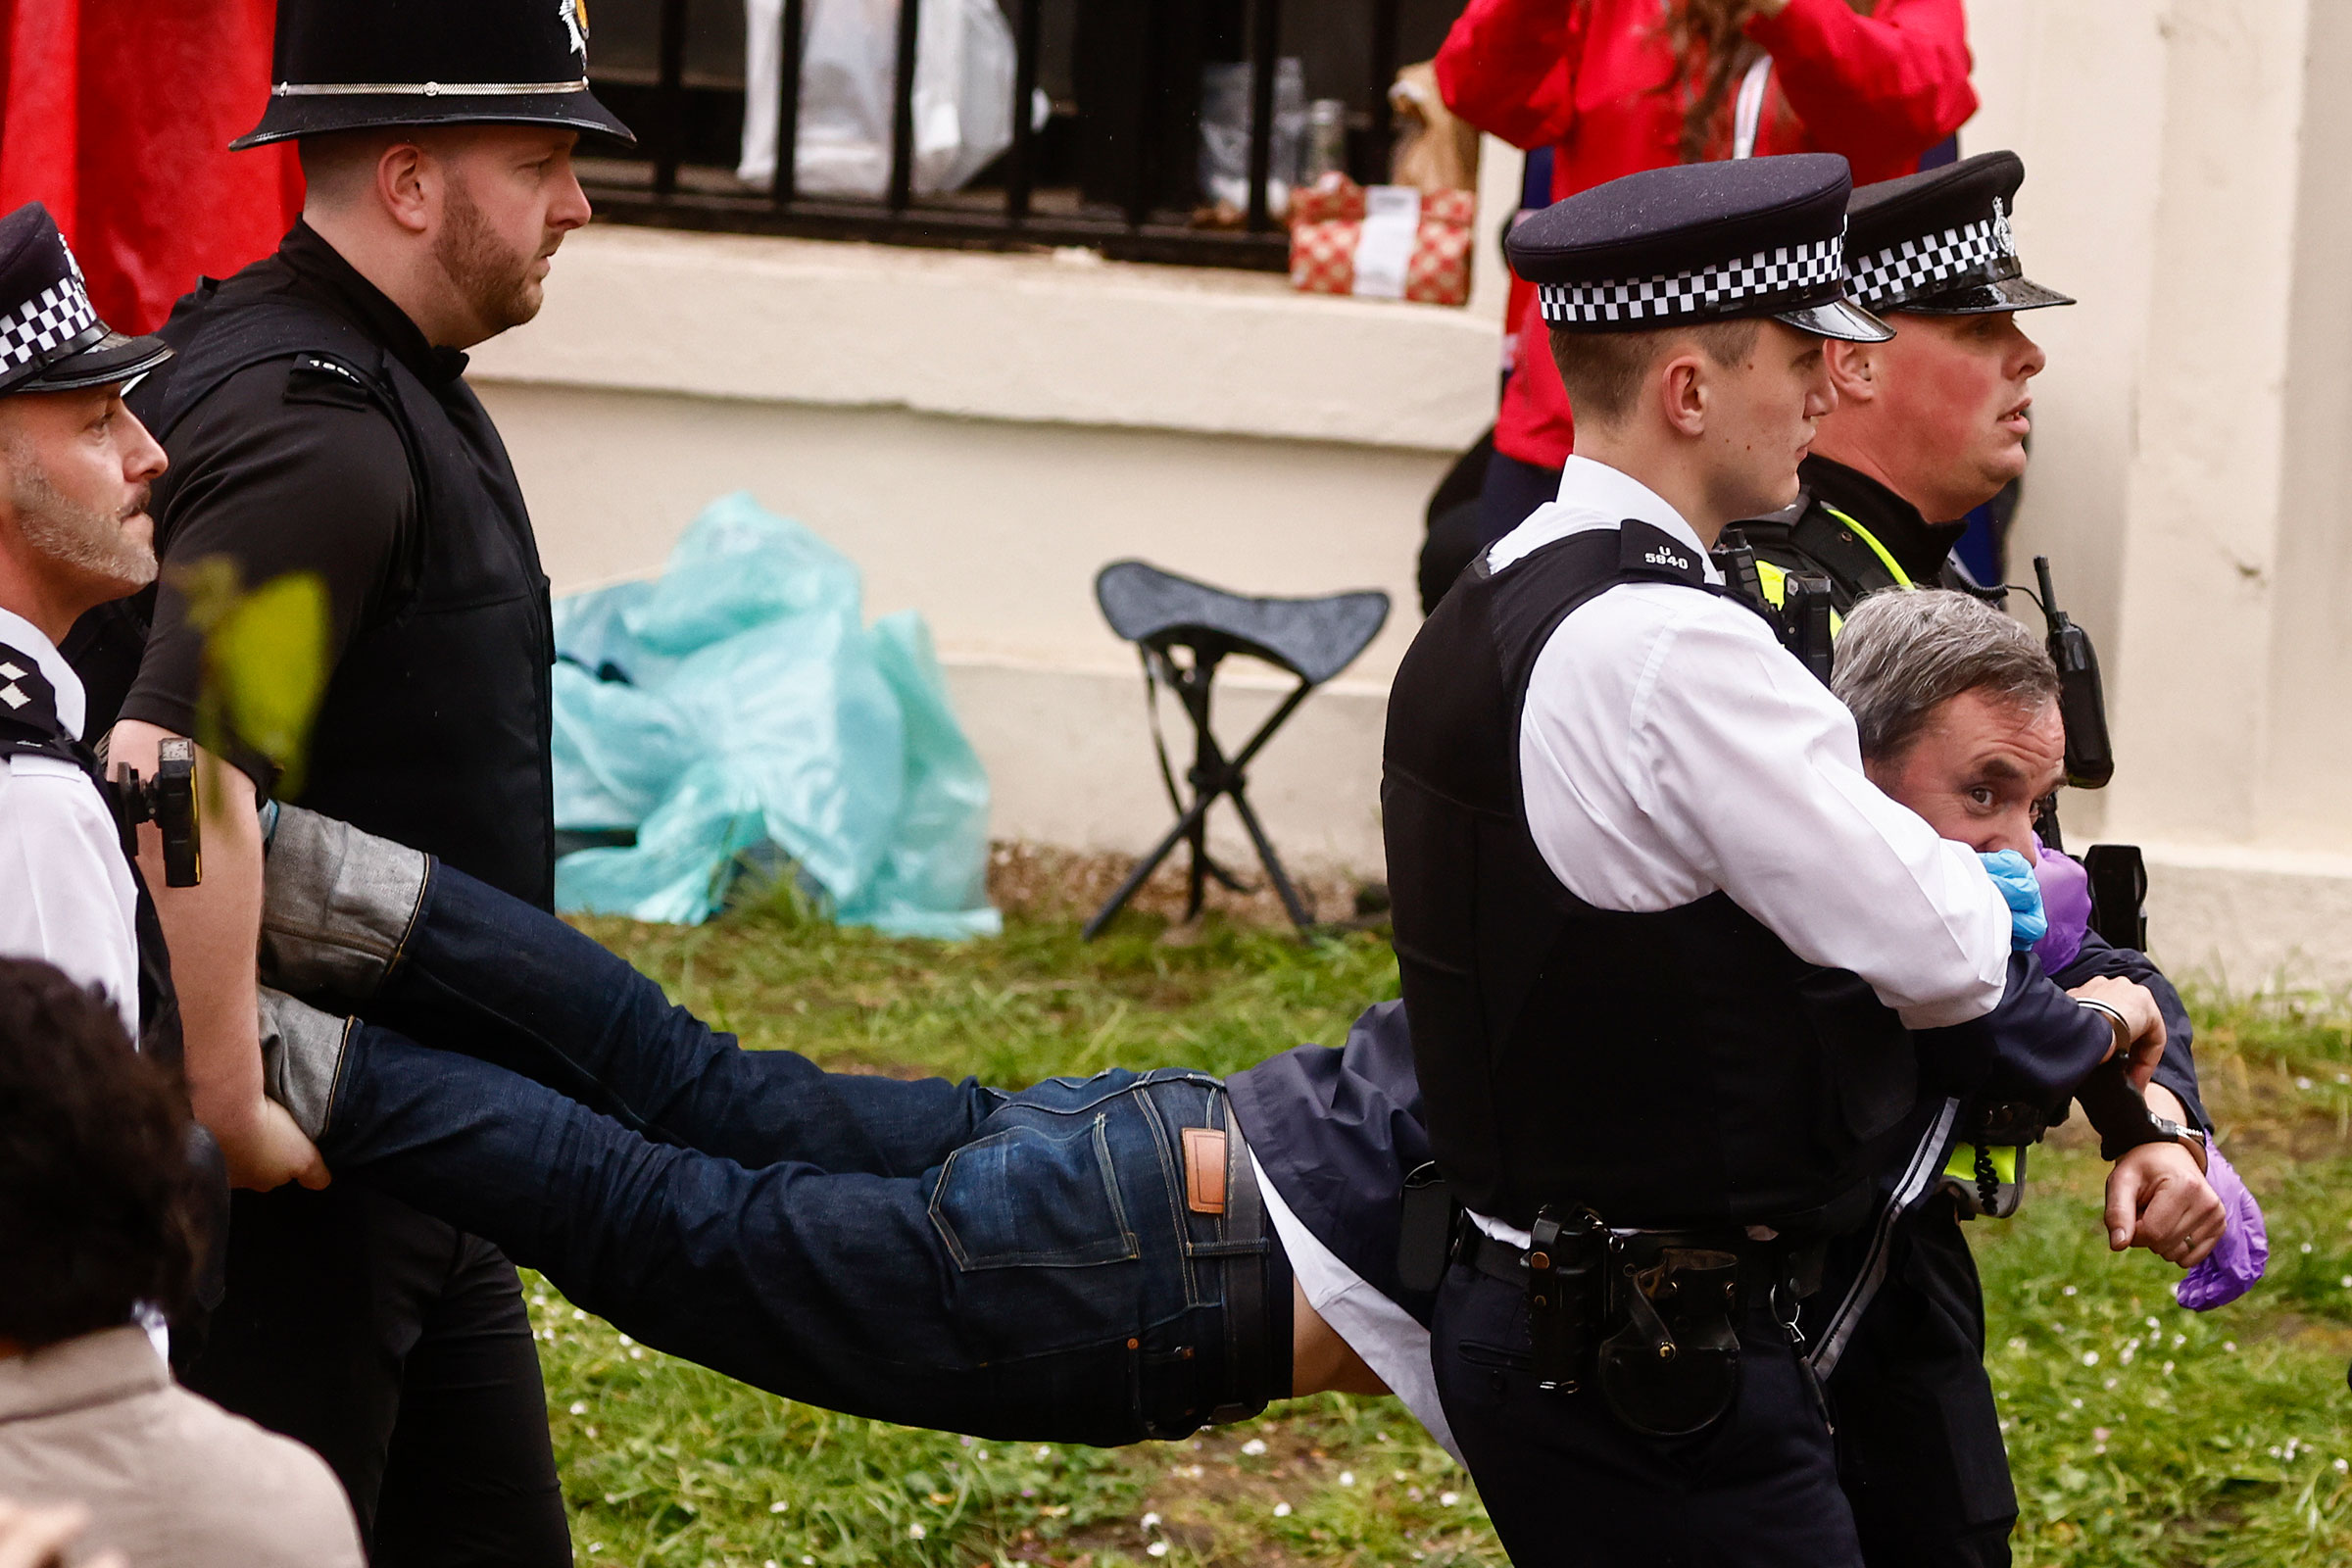 Police officers detain a member of the "Just Stop Oil" movement as people gather to watch the procession during the Coronation of King Charles III and Queen Camilla on Saturday in London.